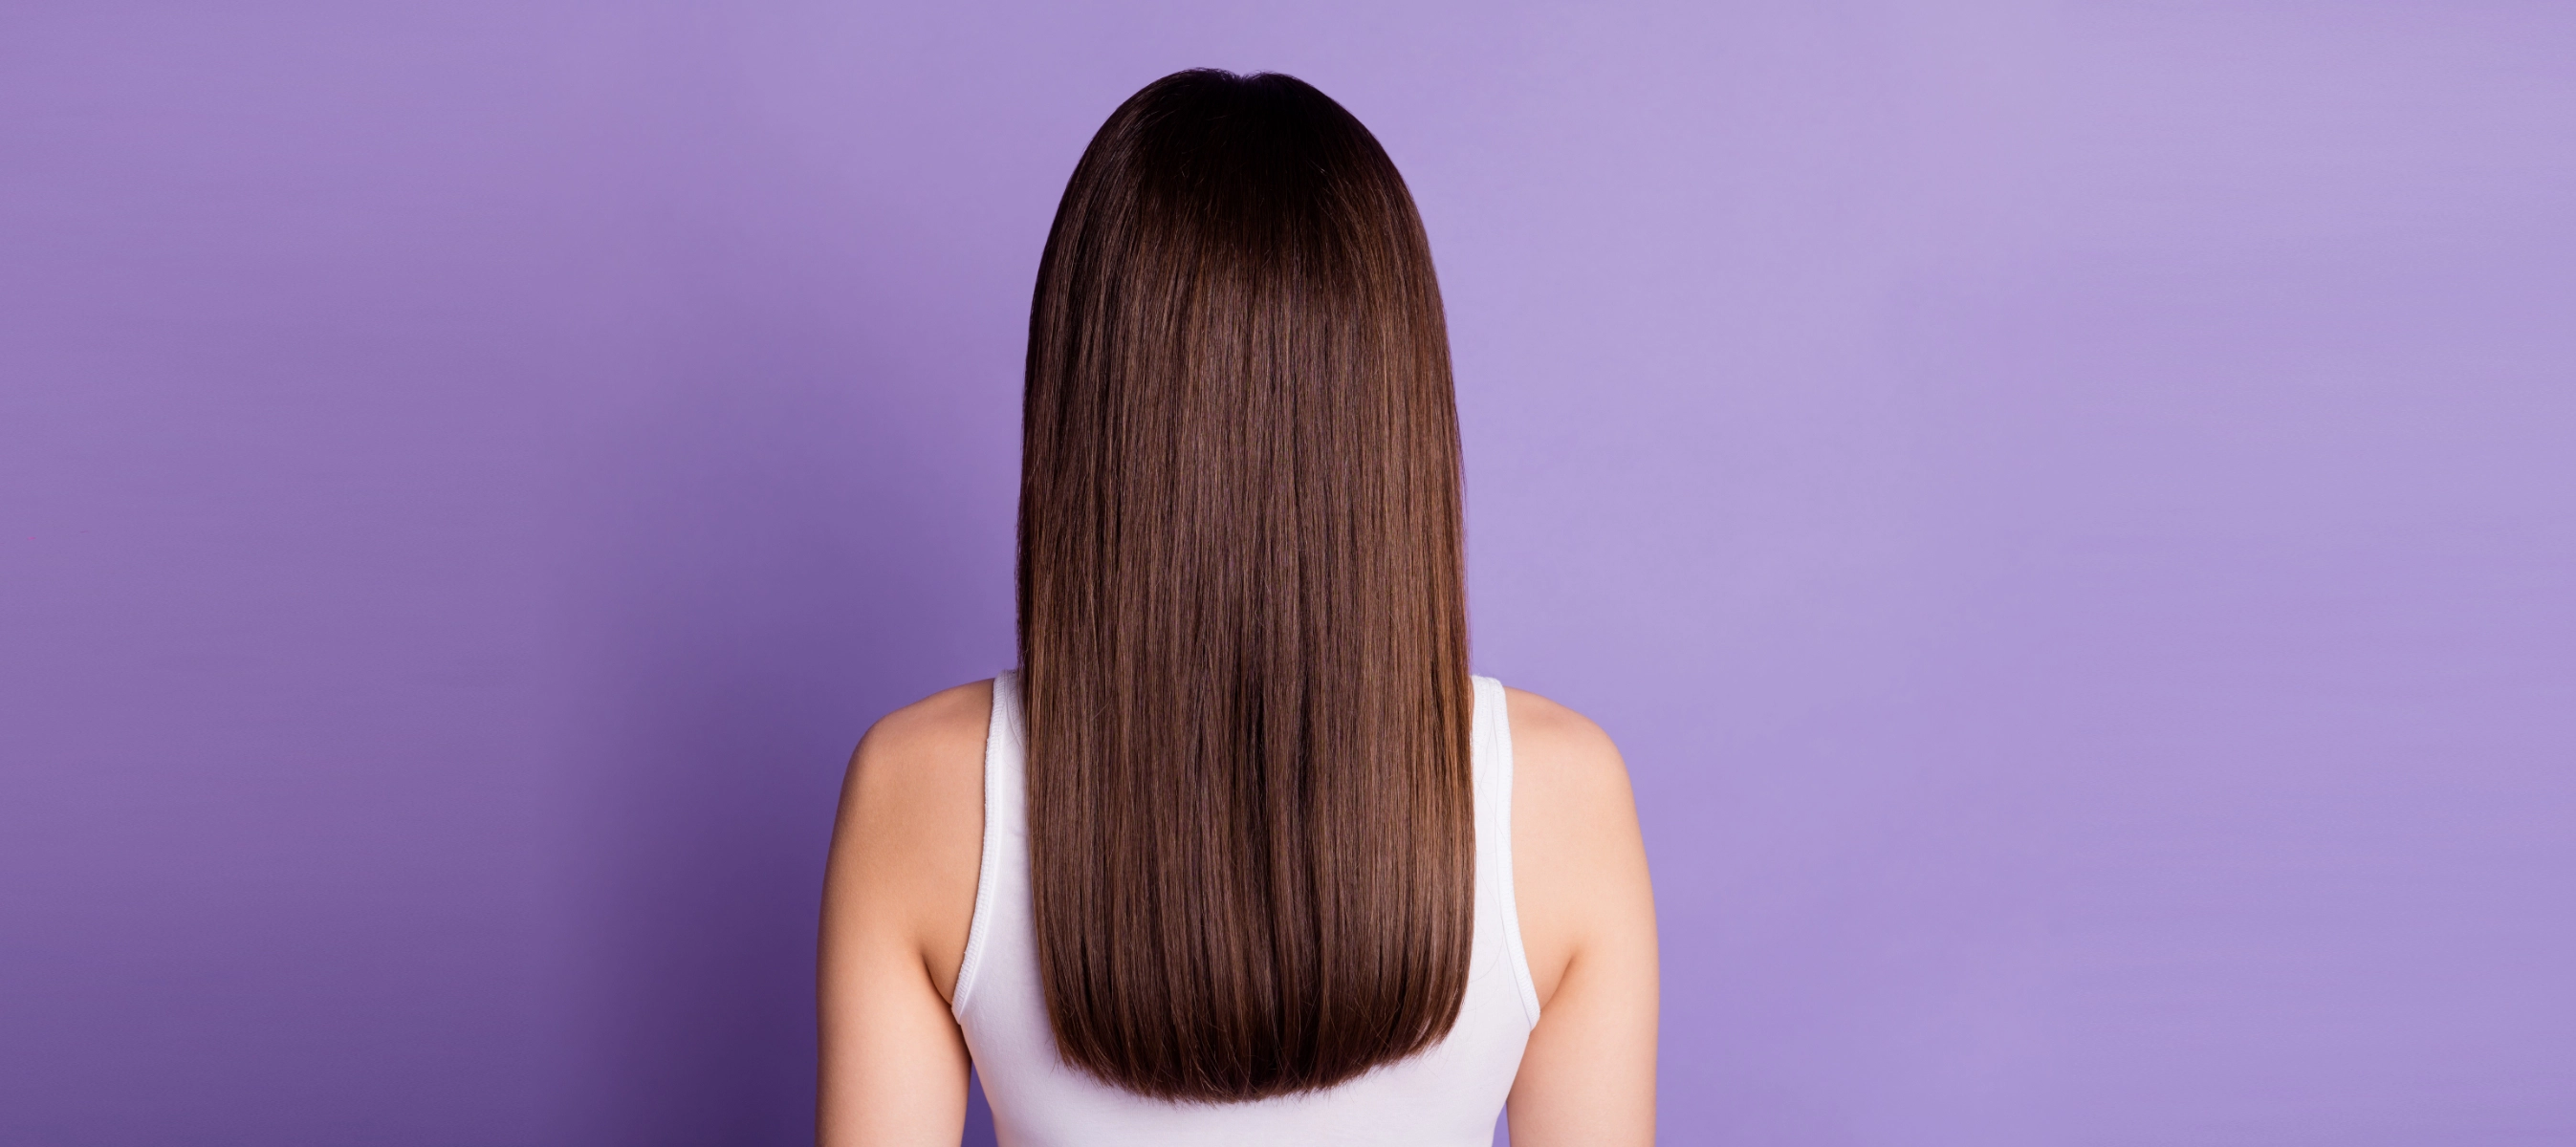 woman with brown straight 1b hair standing with back towards us on a purple background